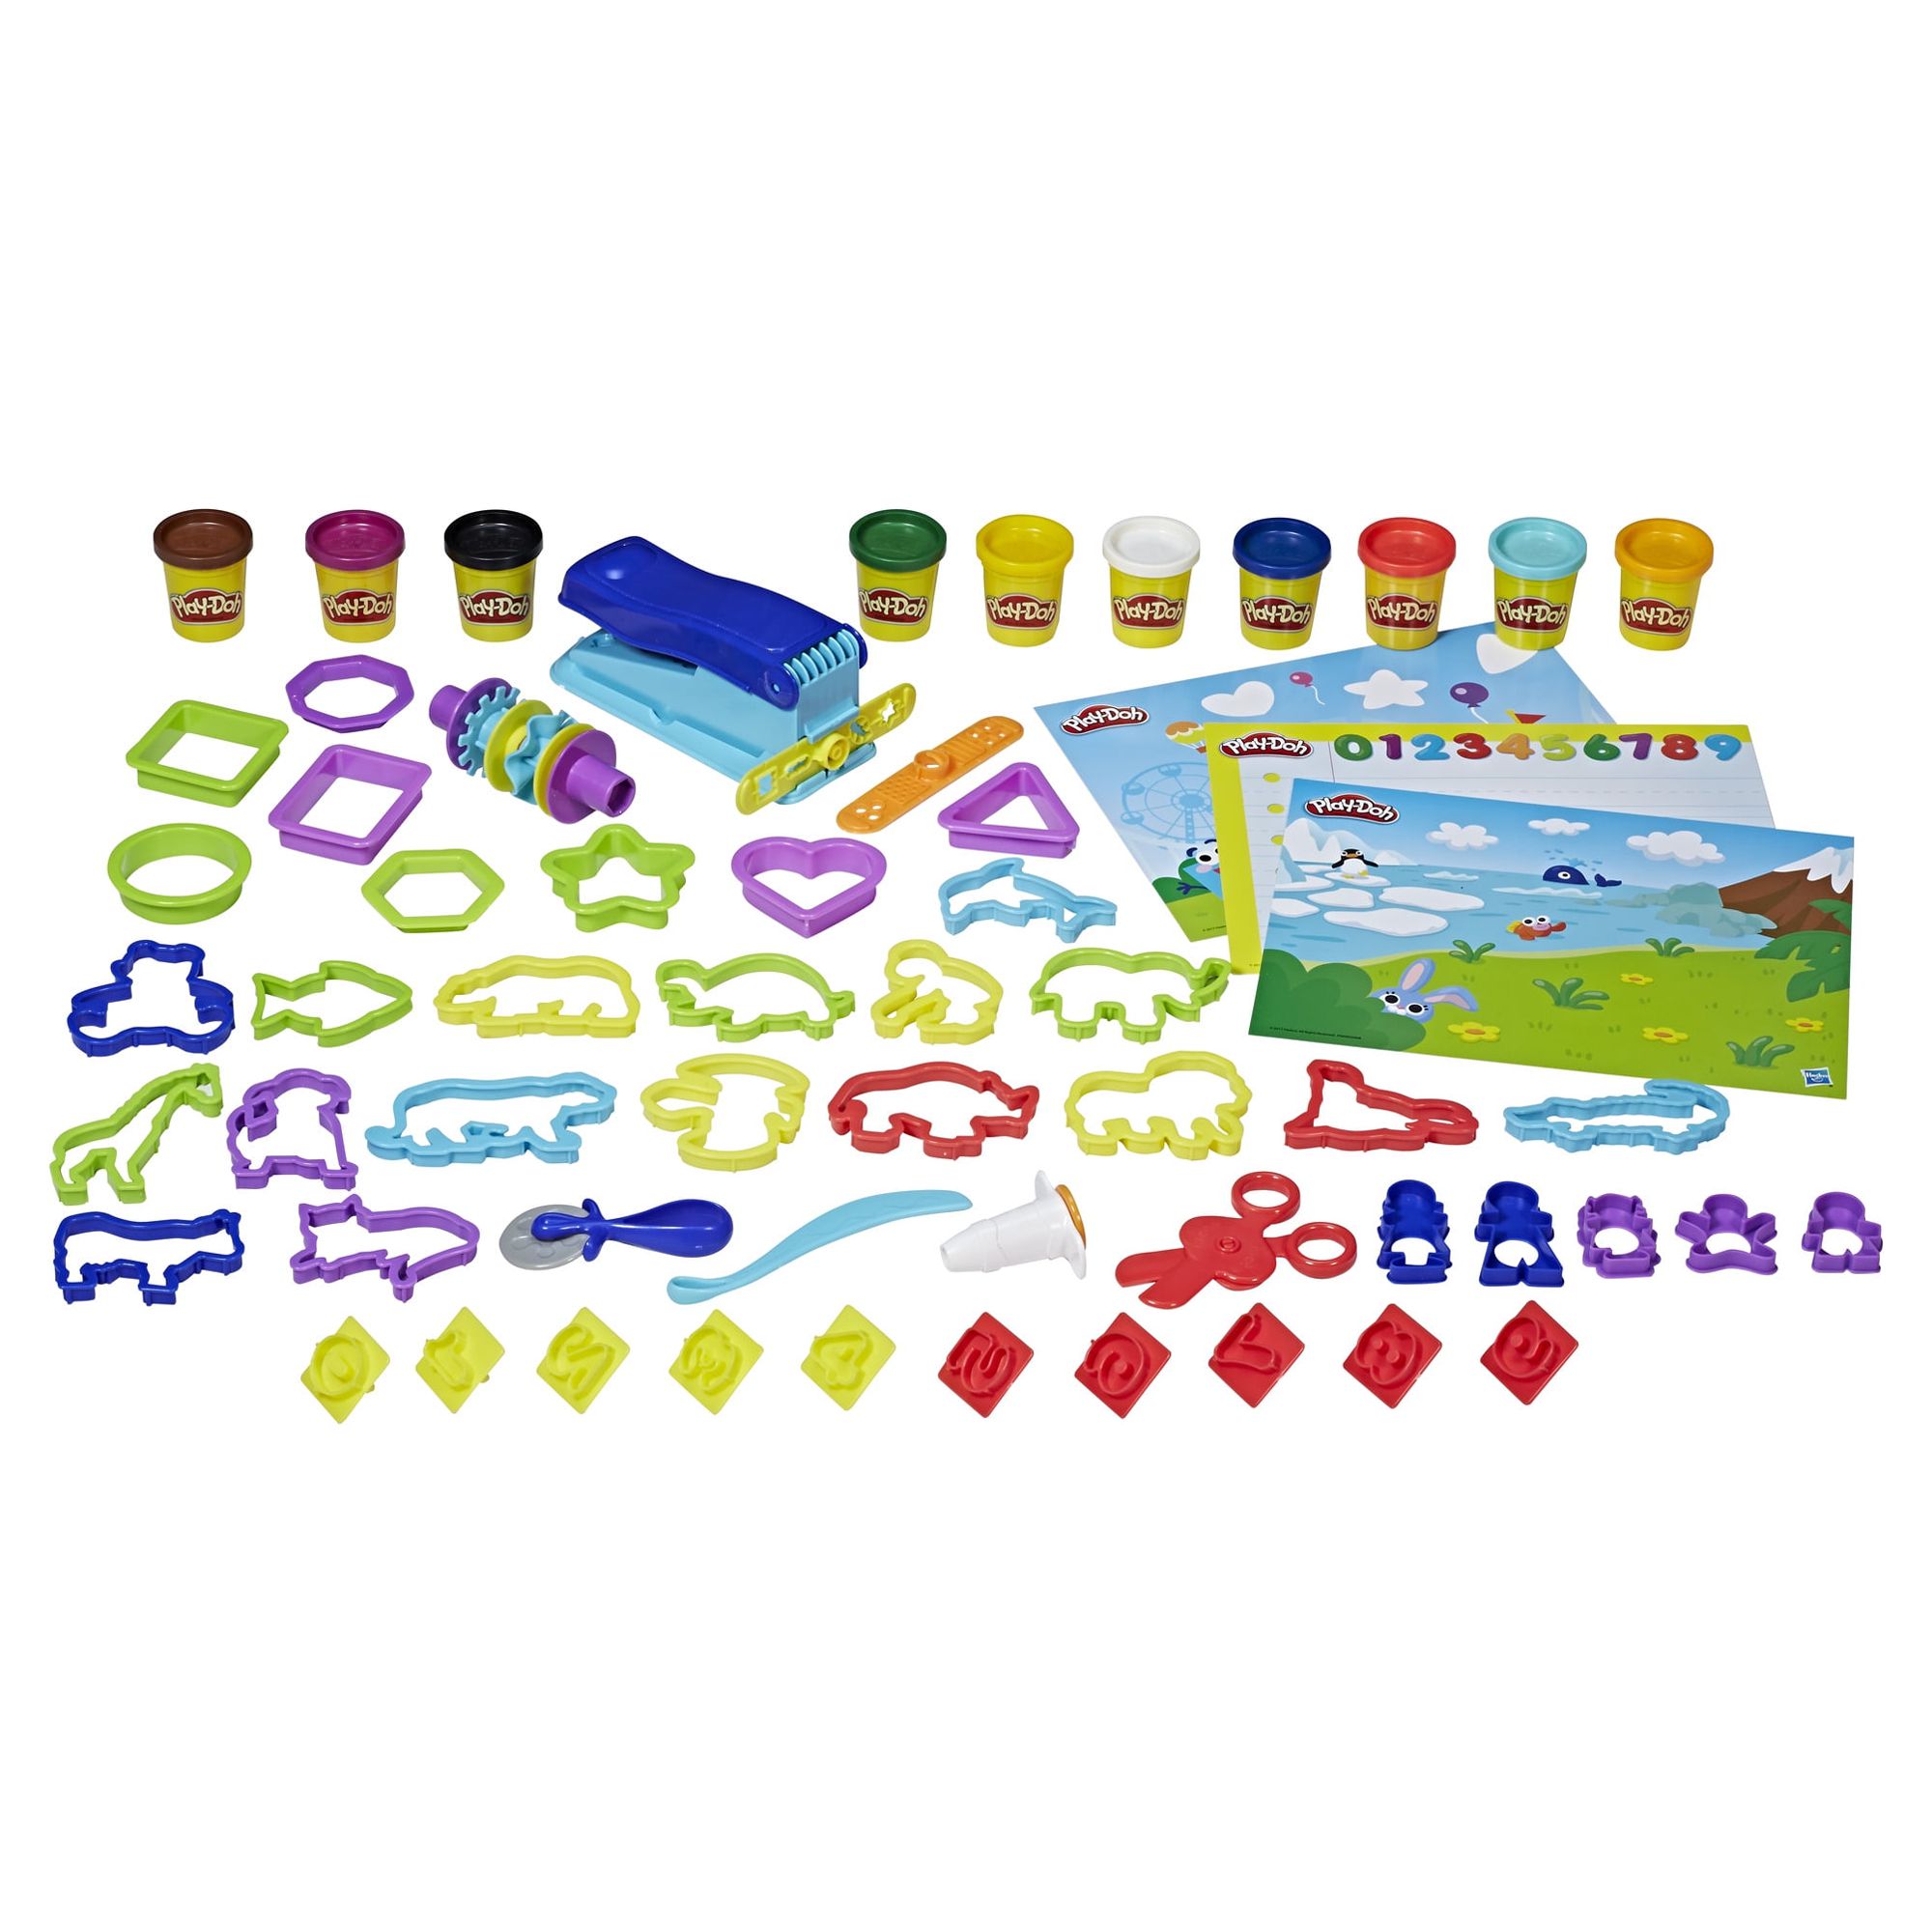 Play-Doh Pre-School Fundamentals Box Playset with 10 Cans & 50+ Tools - image 1 of 10